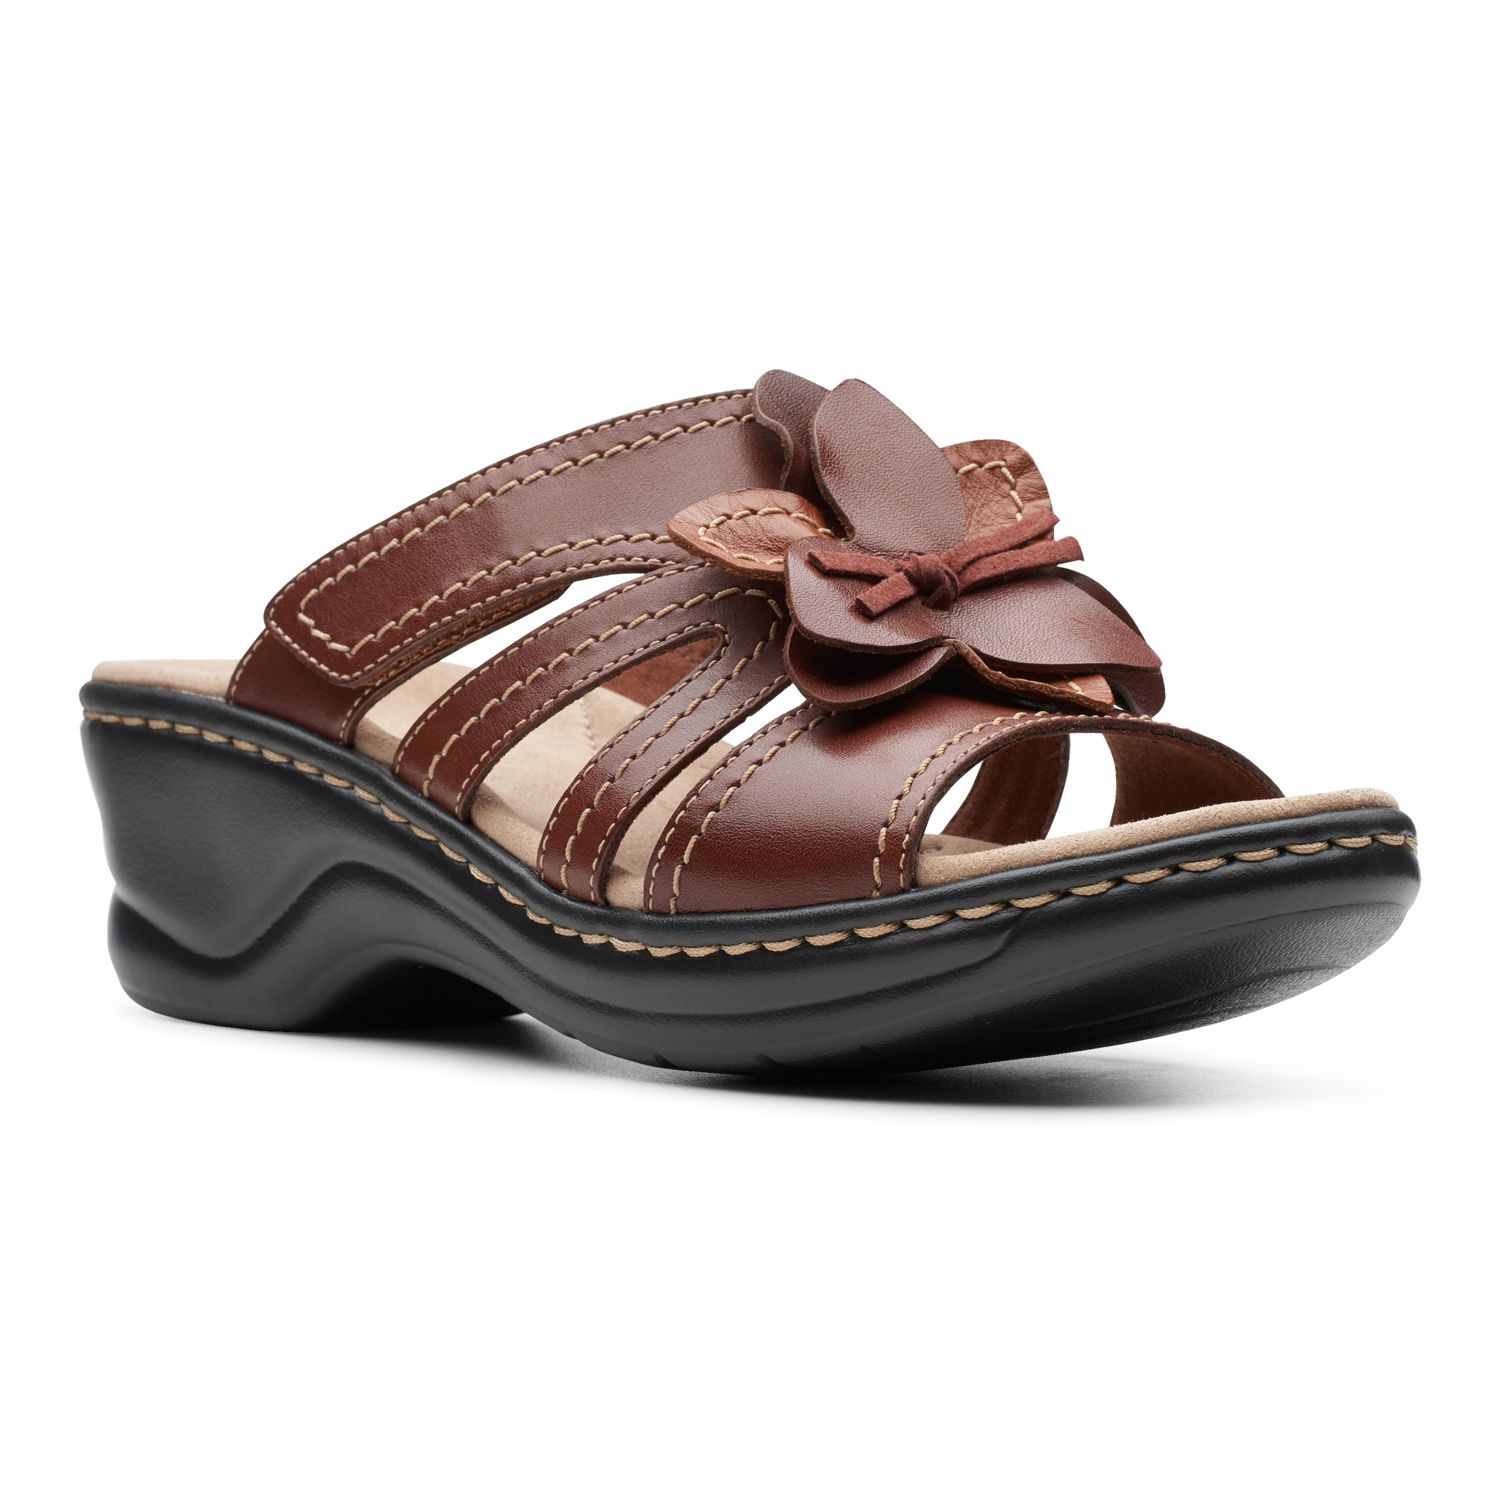 clarks womens leather sandals